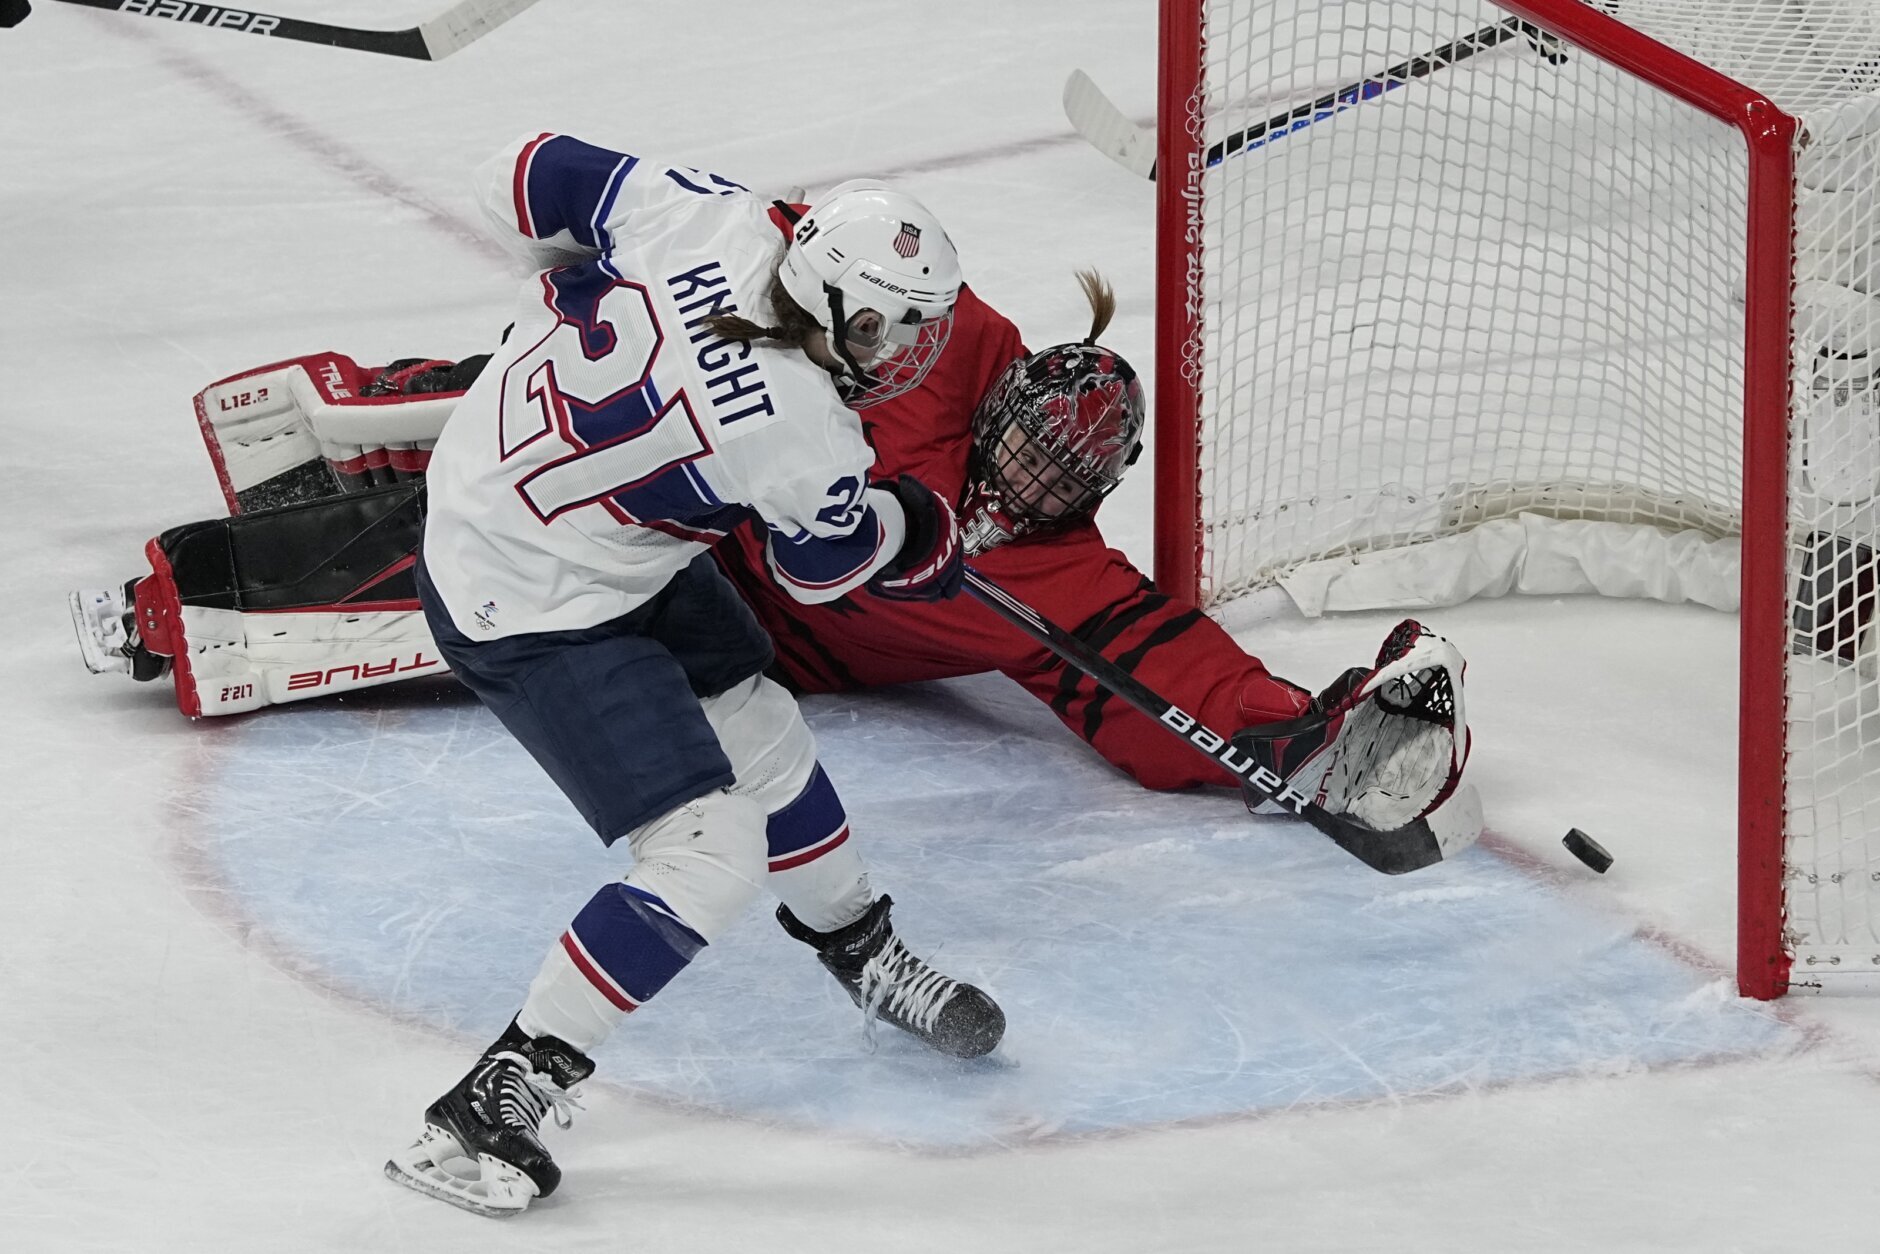 <p>United States&#8217; Hilary Knight (21) scores past Canada goalkeeper Ann-Renee Desbiens (35) during the women&#8217;s gold medal hockey game at the 2022 Winter Olympics, Thursday, Feb. 17, 2022, in Beijing.</p>
